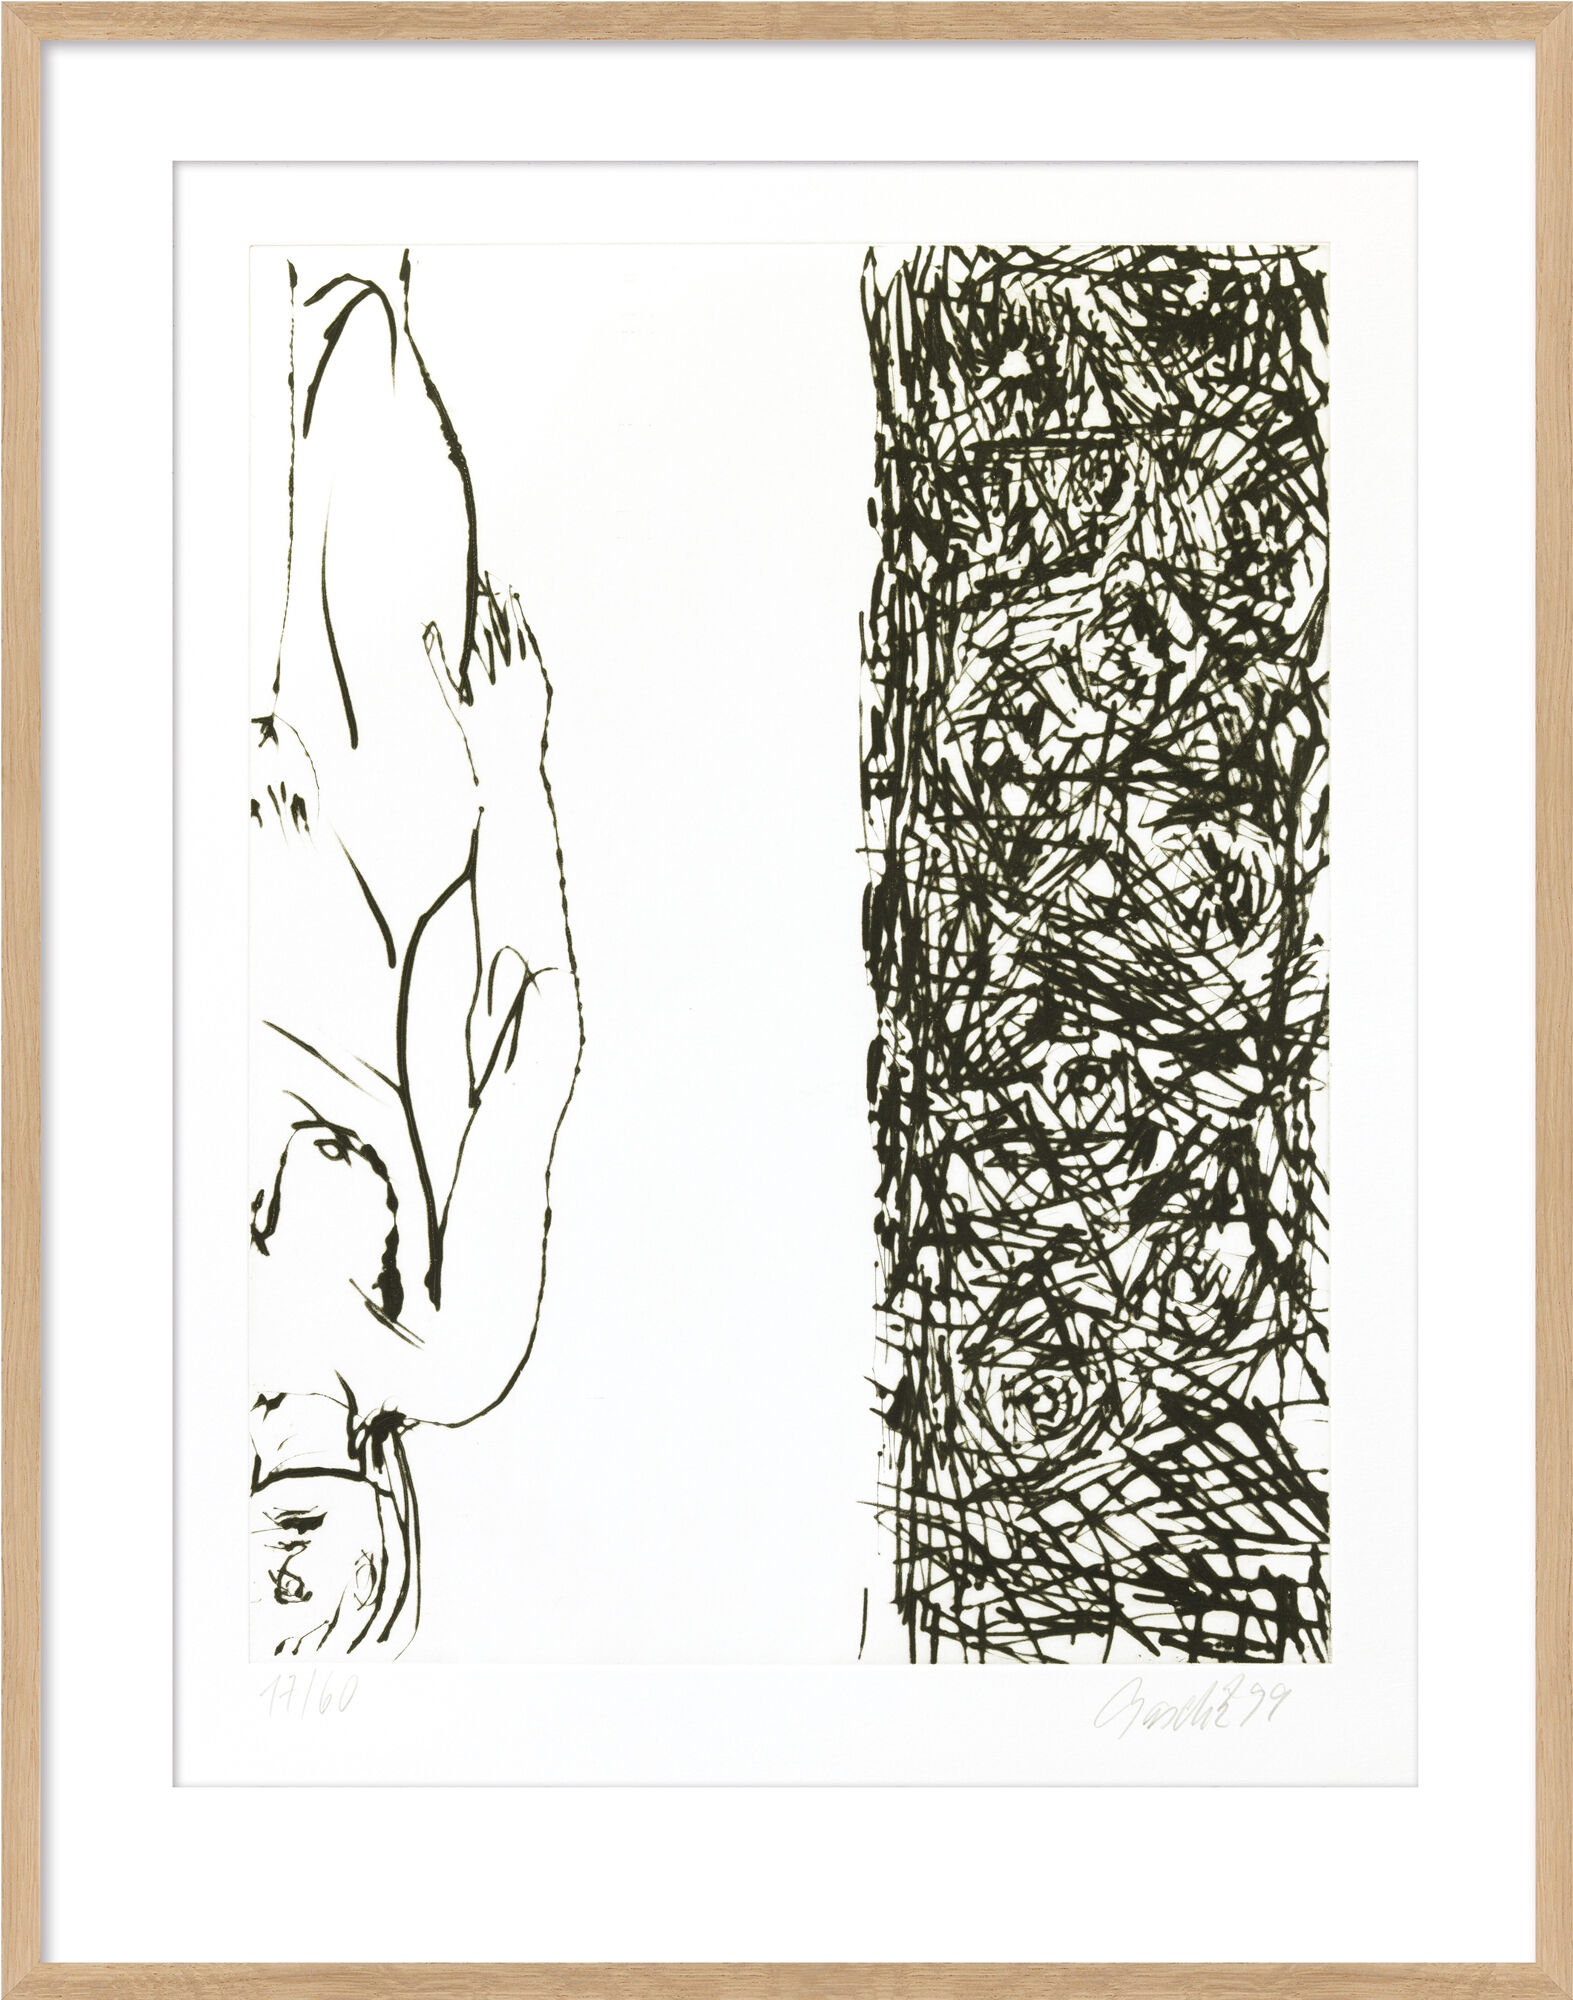 Picture "Untitled I." from the portfolio "Signs" (1999/2000) by Georg Baselitz